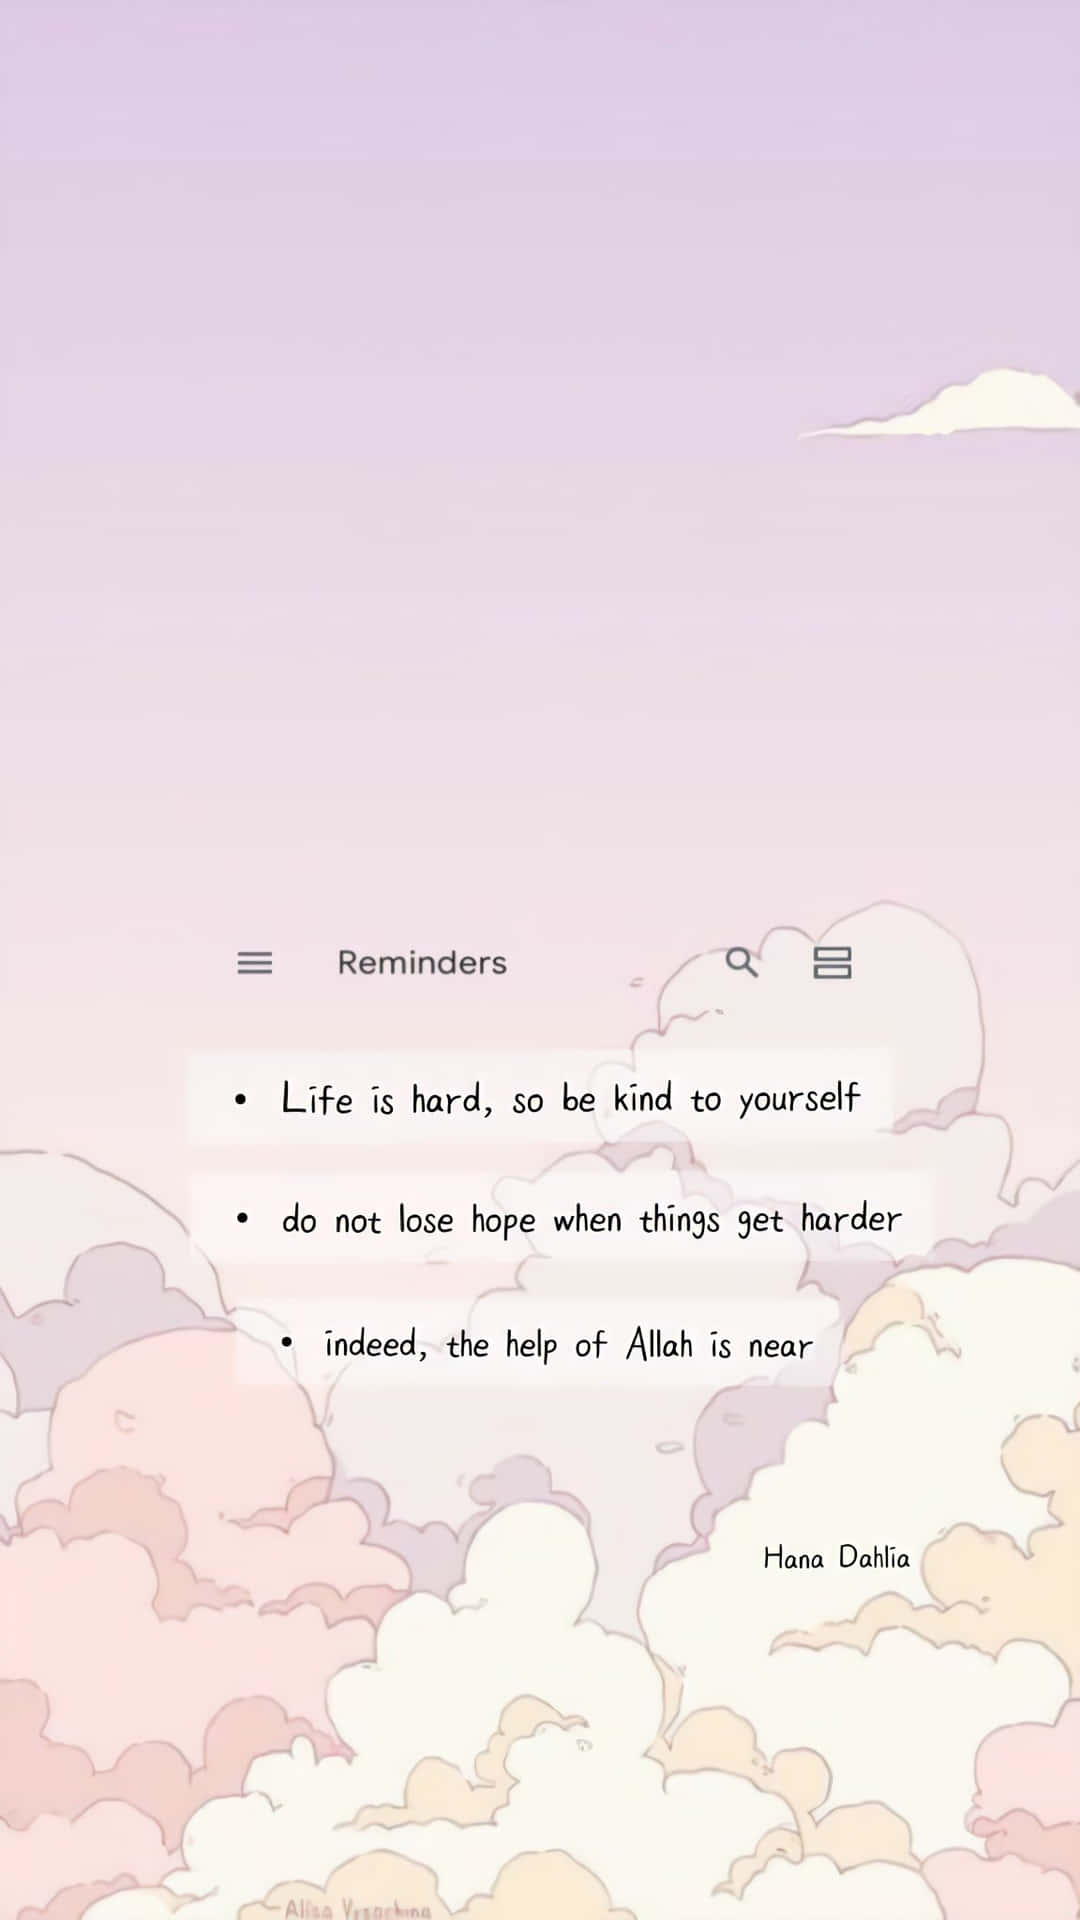 A Pink Sky With Clouds And A Quote